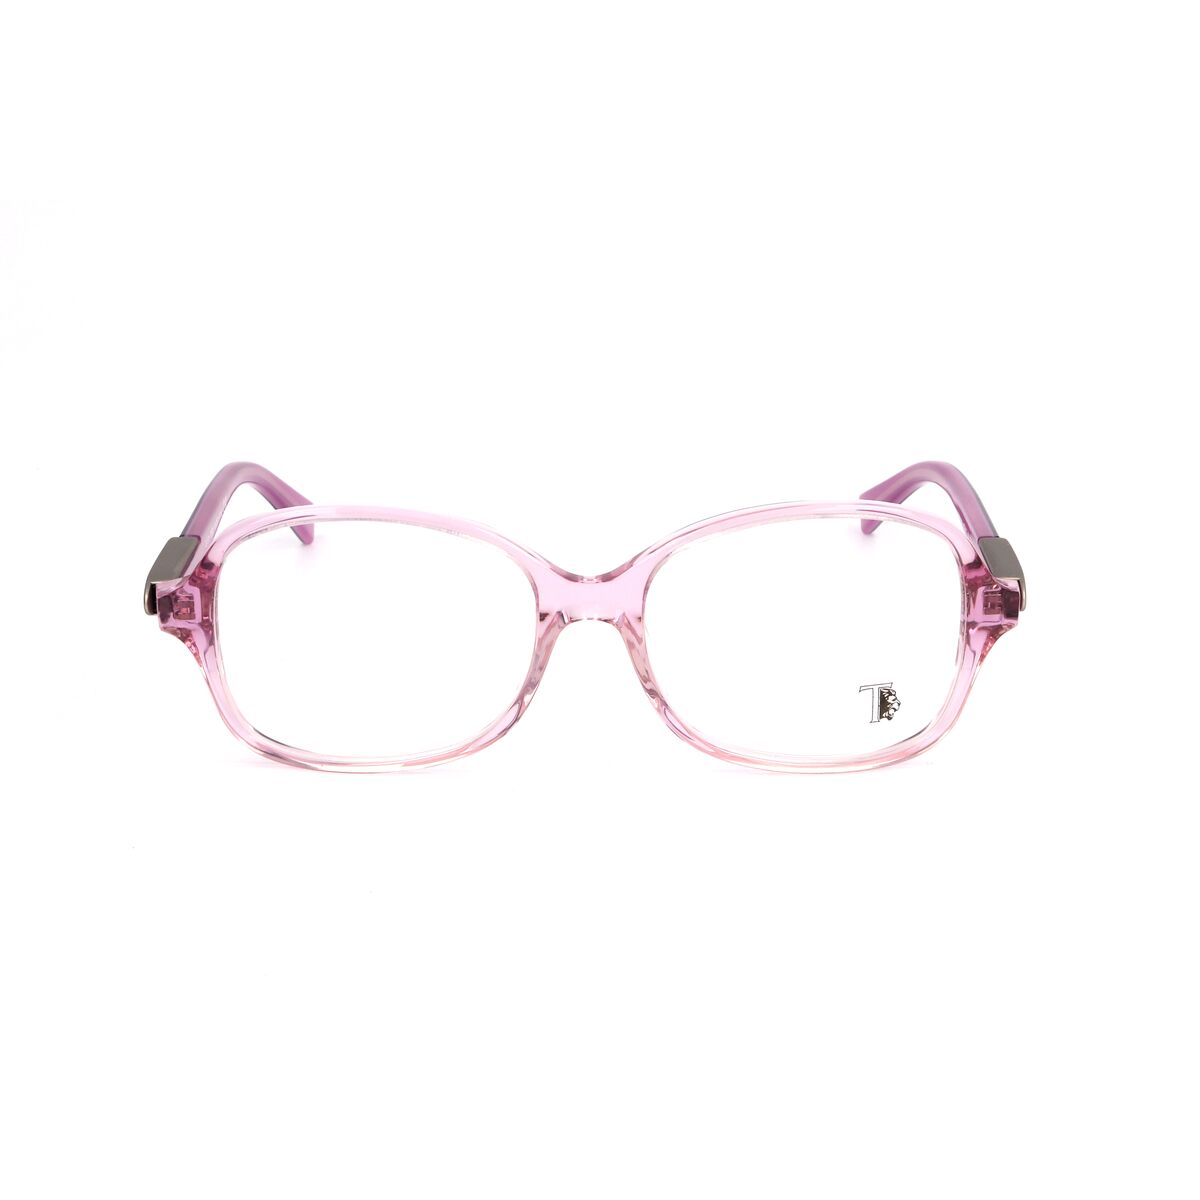 Ladies'Spectacle frame Tods TO5017-074-53 Pink